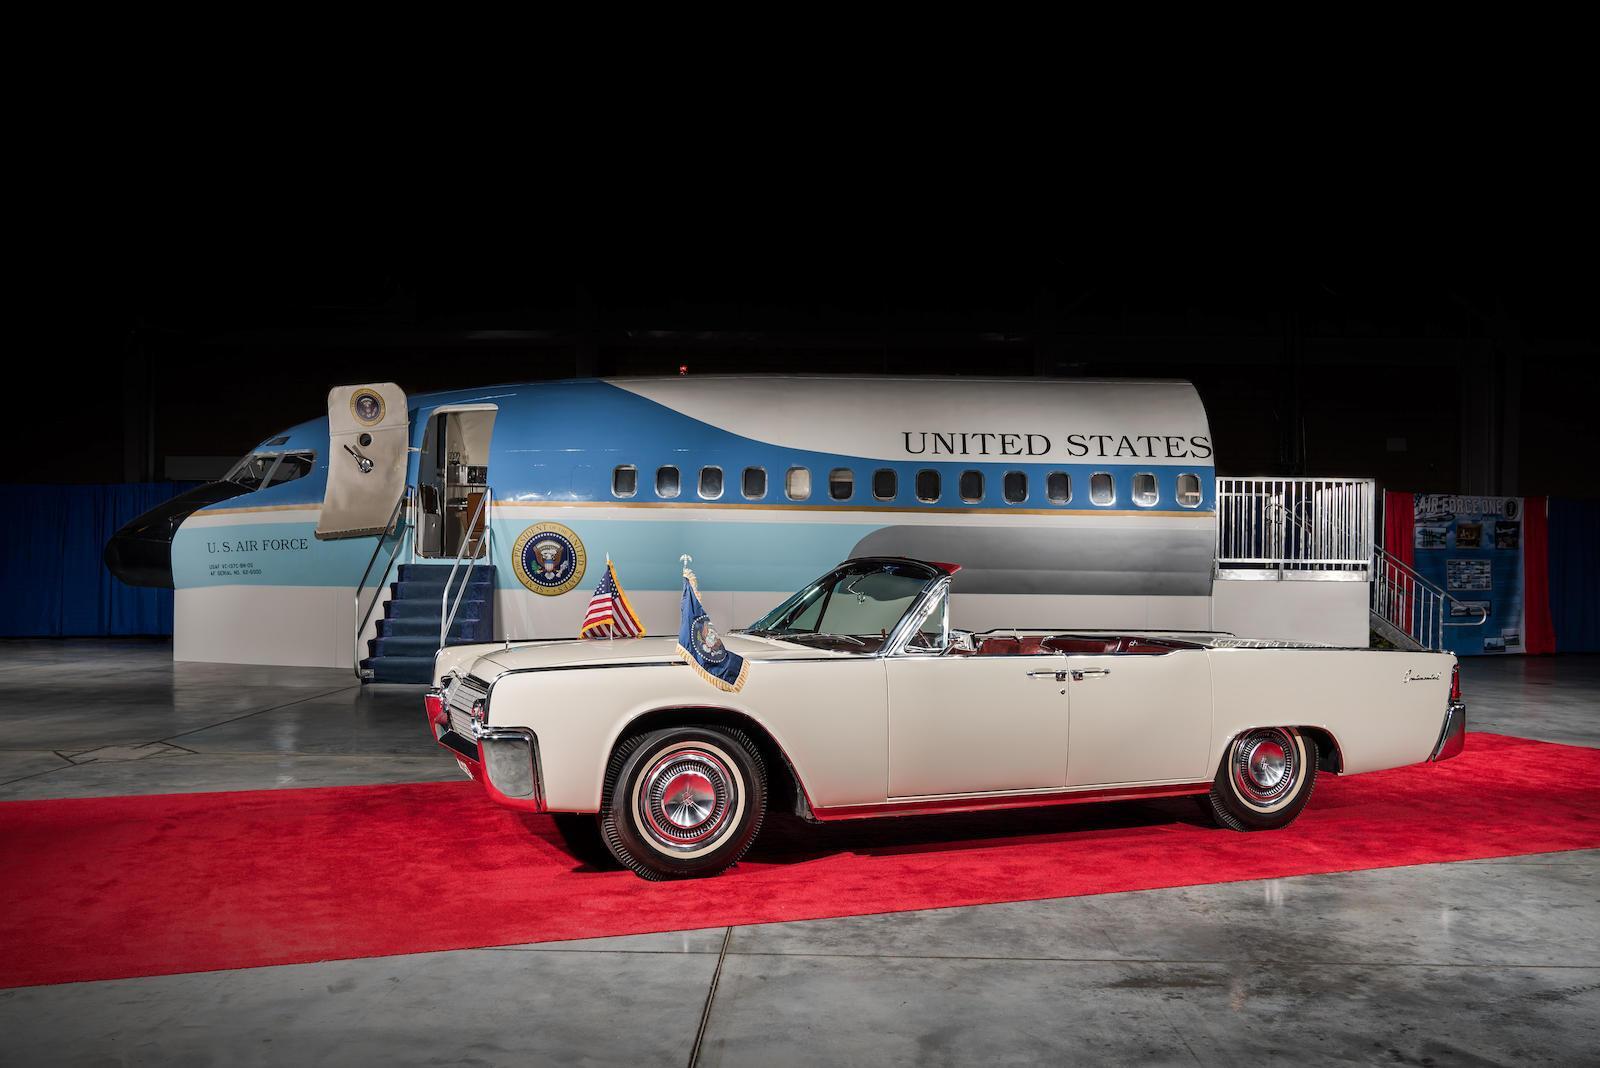 1963 Lincoln Continental Convertible. Фото: